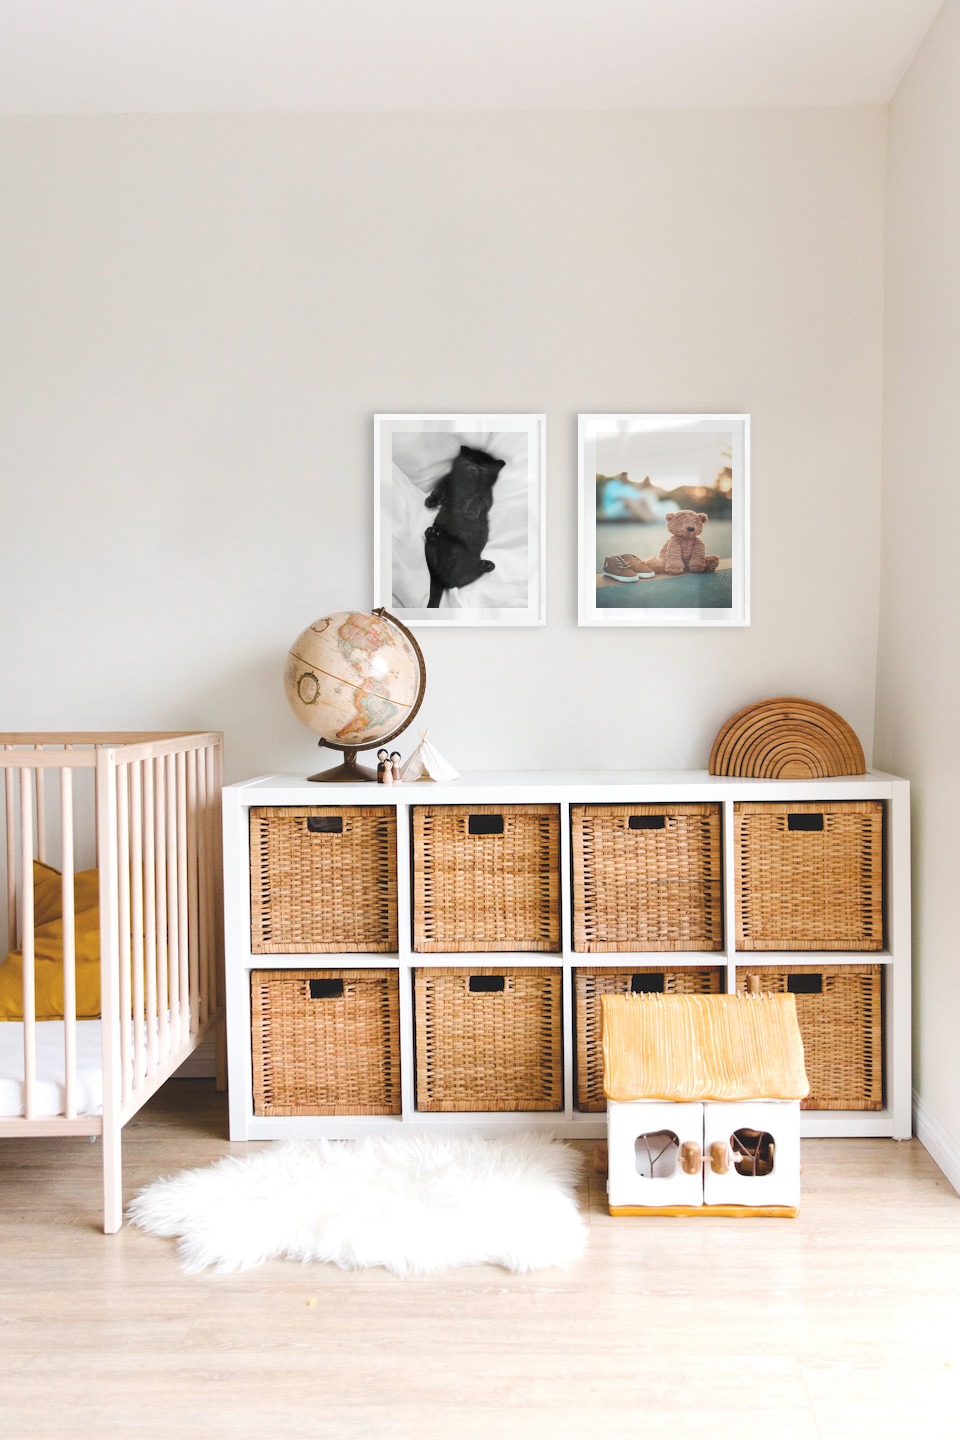 Gallery wall with picture frames in white in sizes 40x50 with prints "Cat in bed" and "Teddy bear on the street"